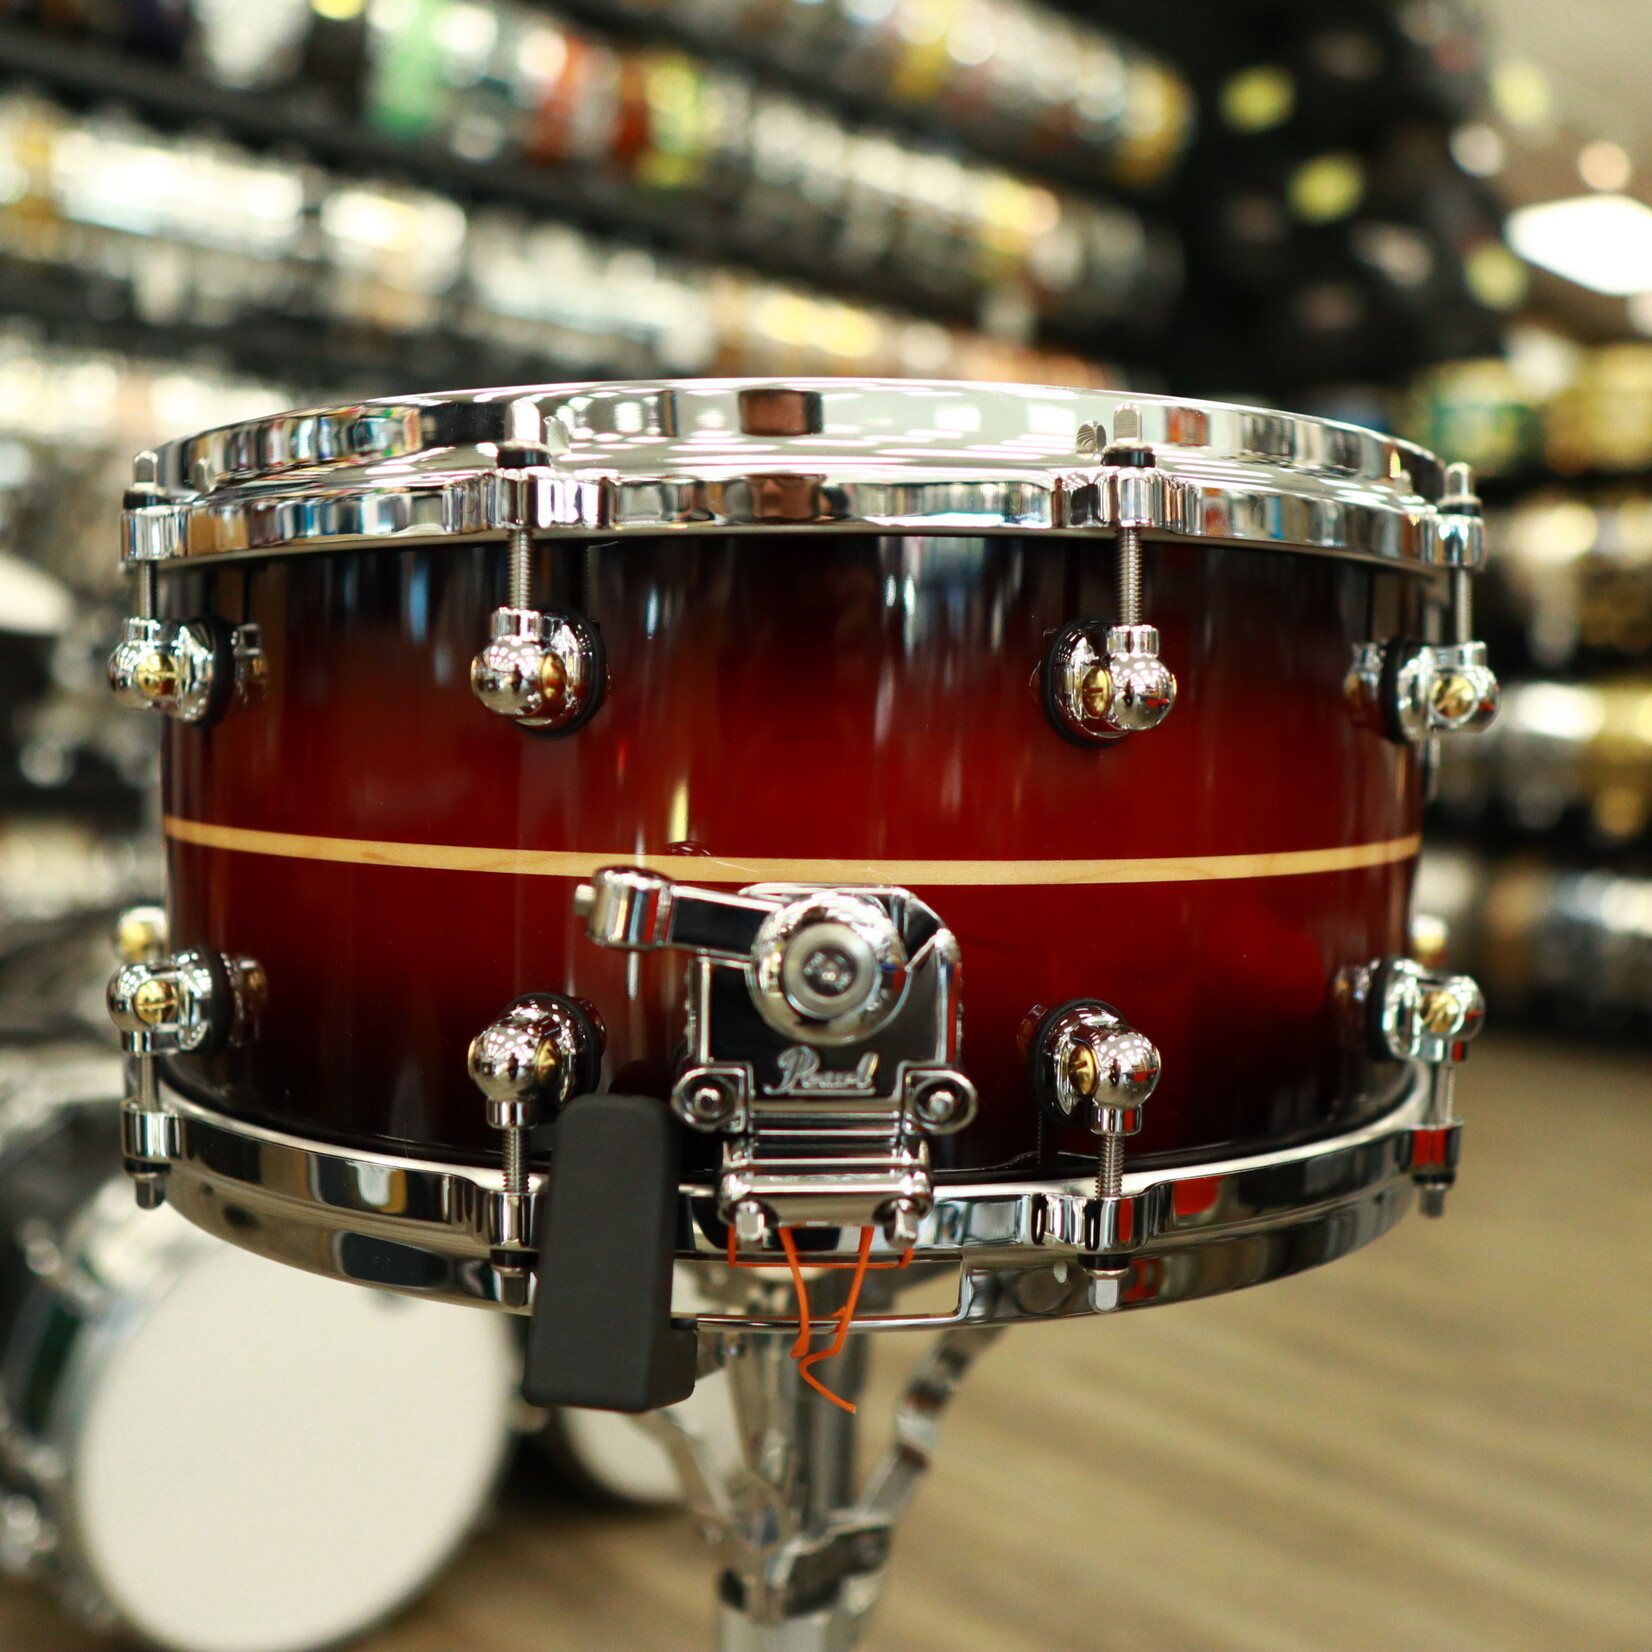 Pearl Pearl Reference One 6.5x14" Snare Drum (Played by Omar Hakim) (Red Burst Stripe)